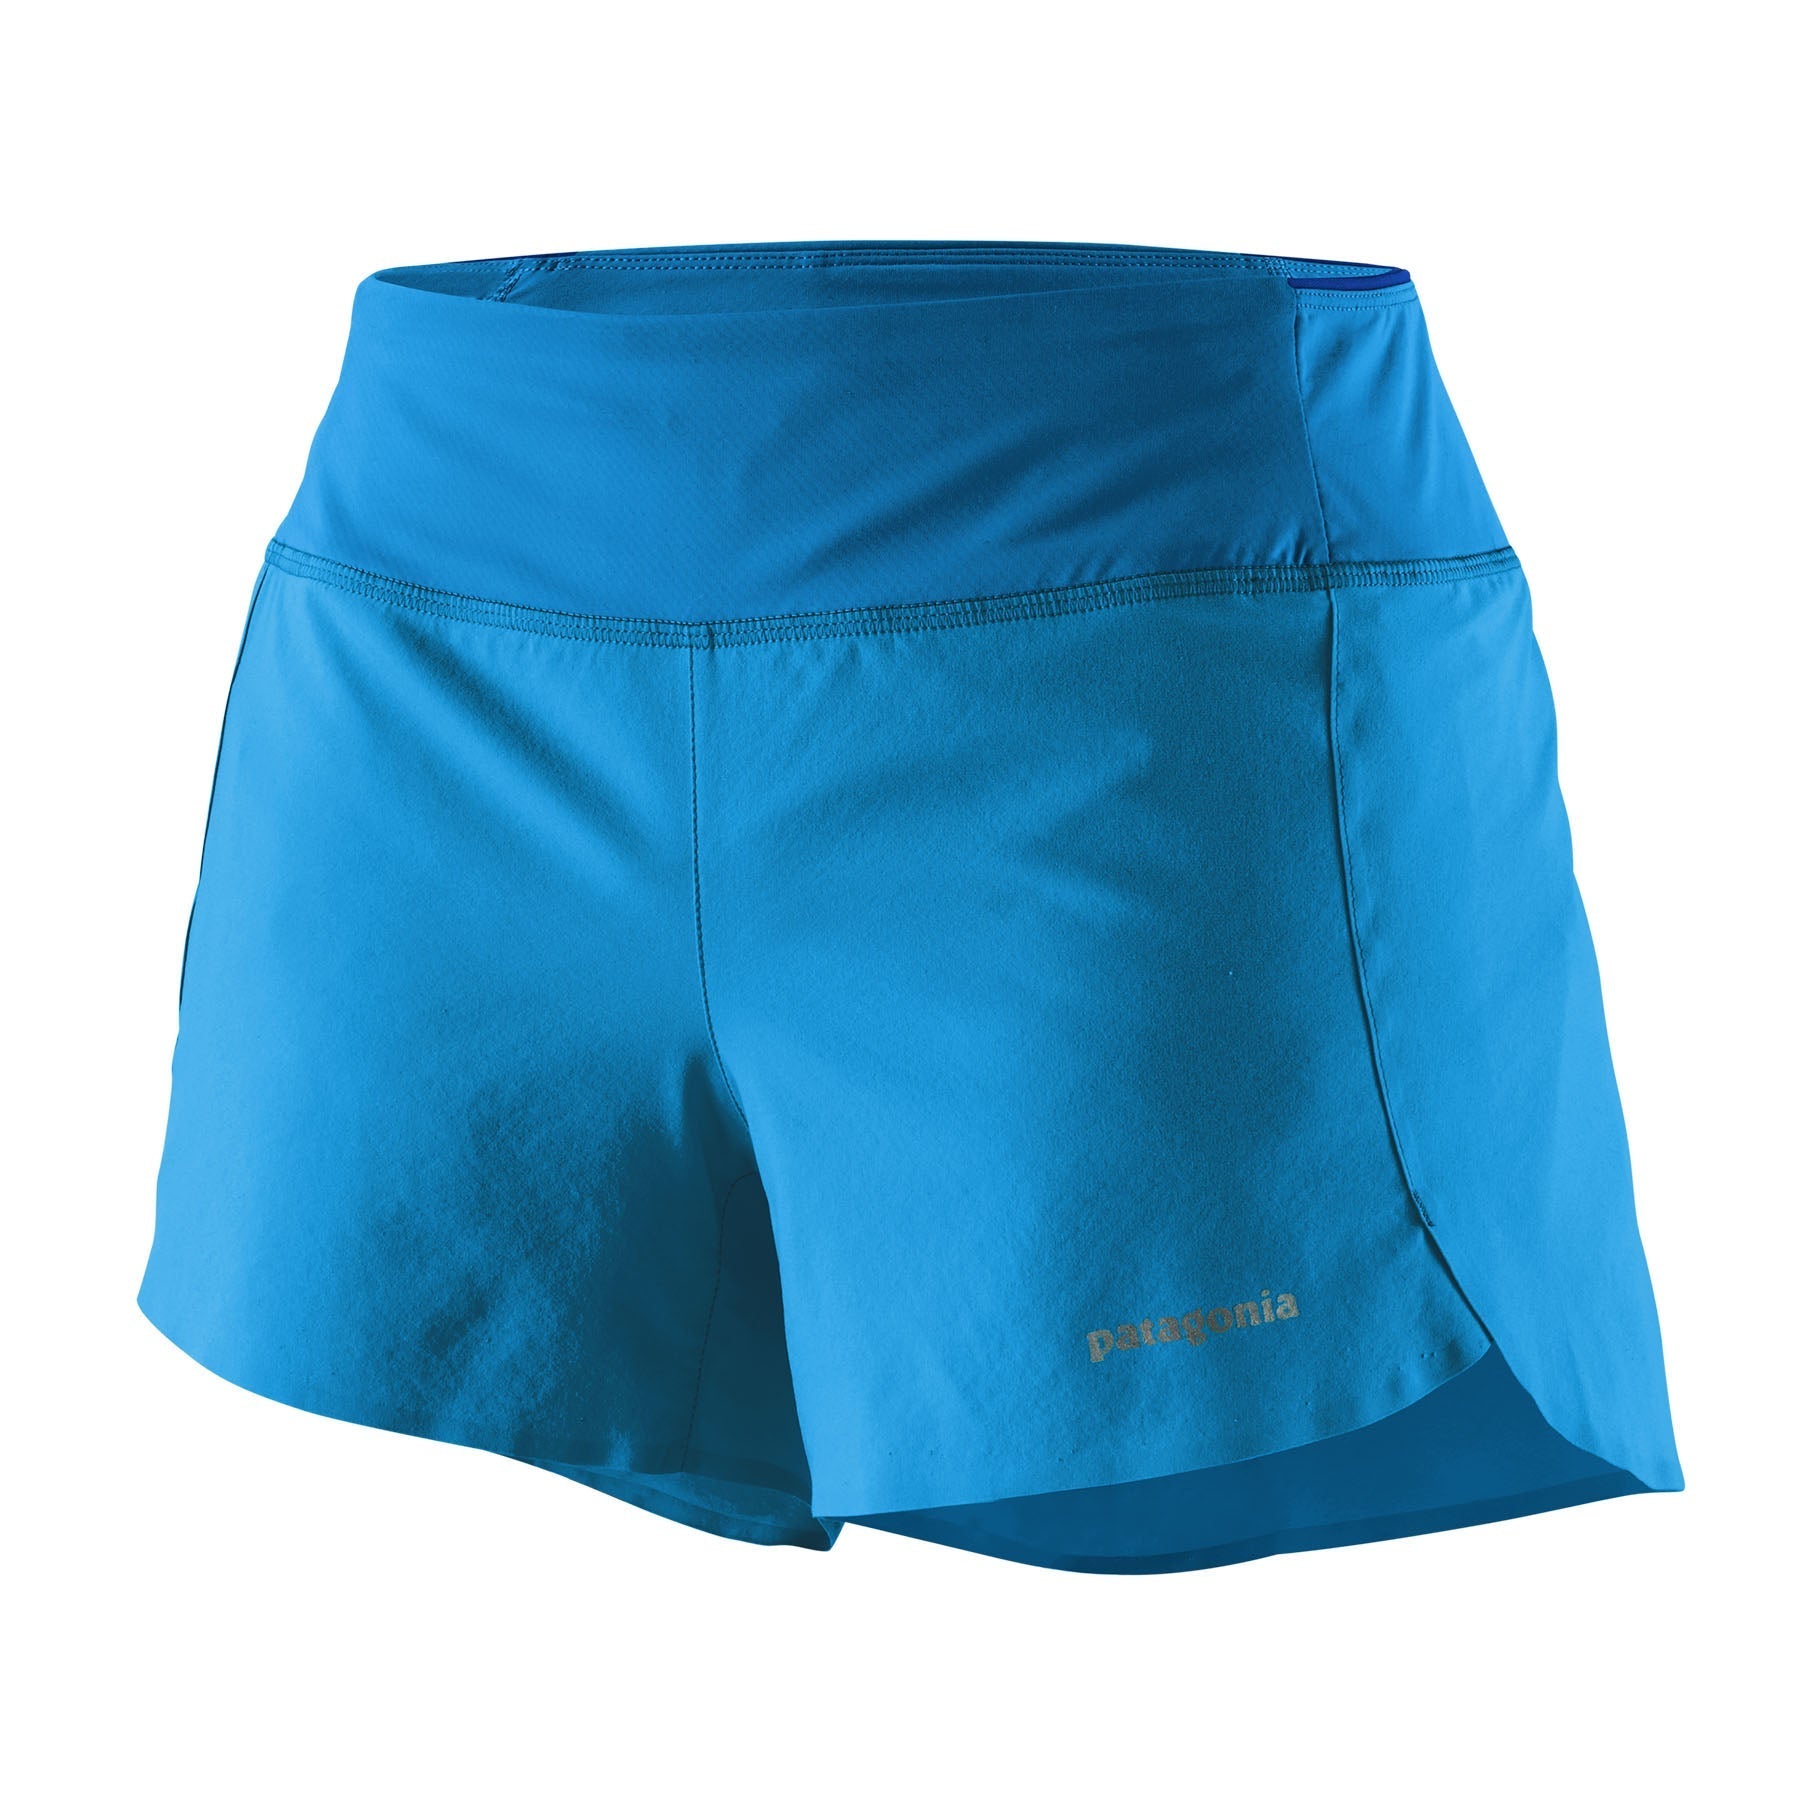 Women's Strider Pro Shorts - 3 1/2 in. in Vessel Blue | Patagonia Bend